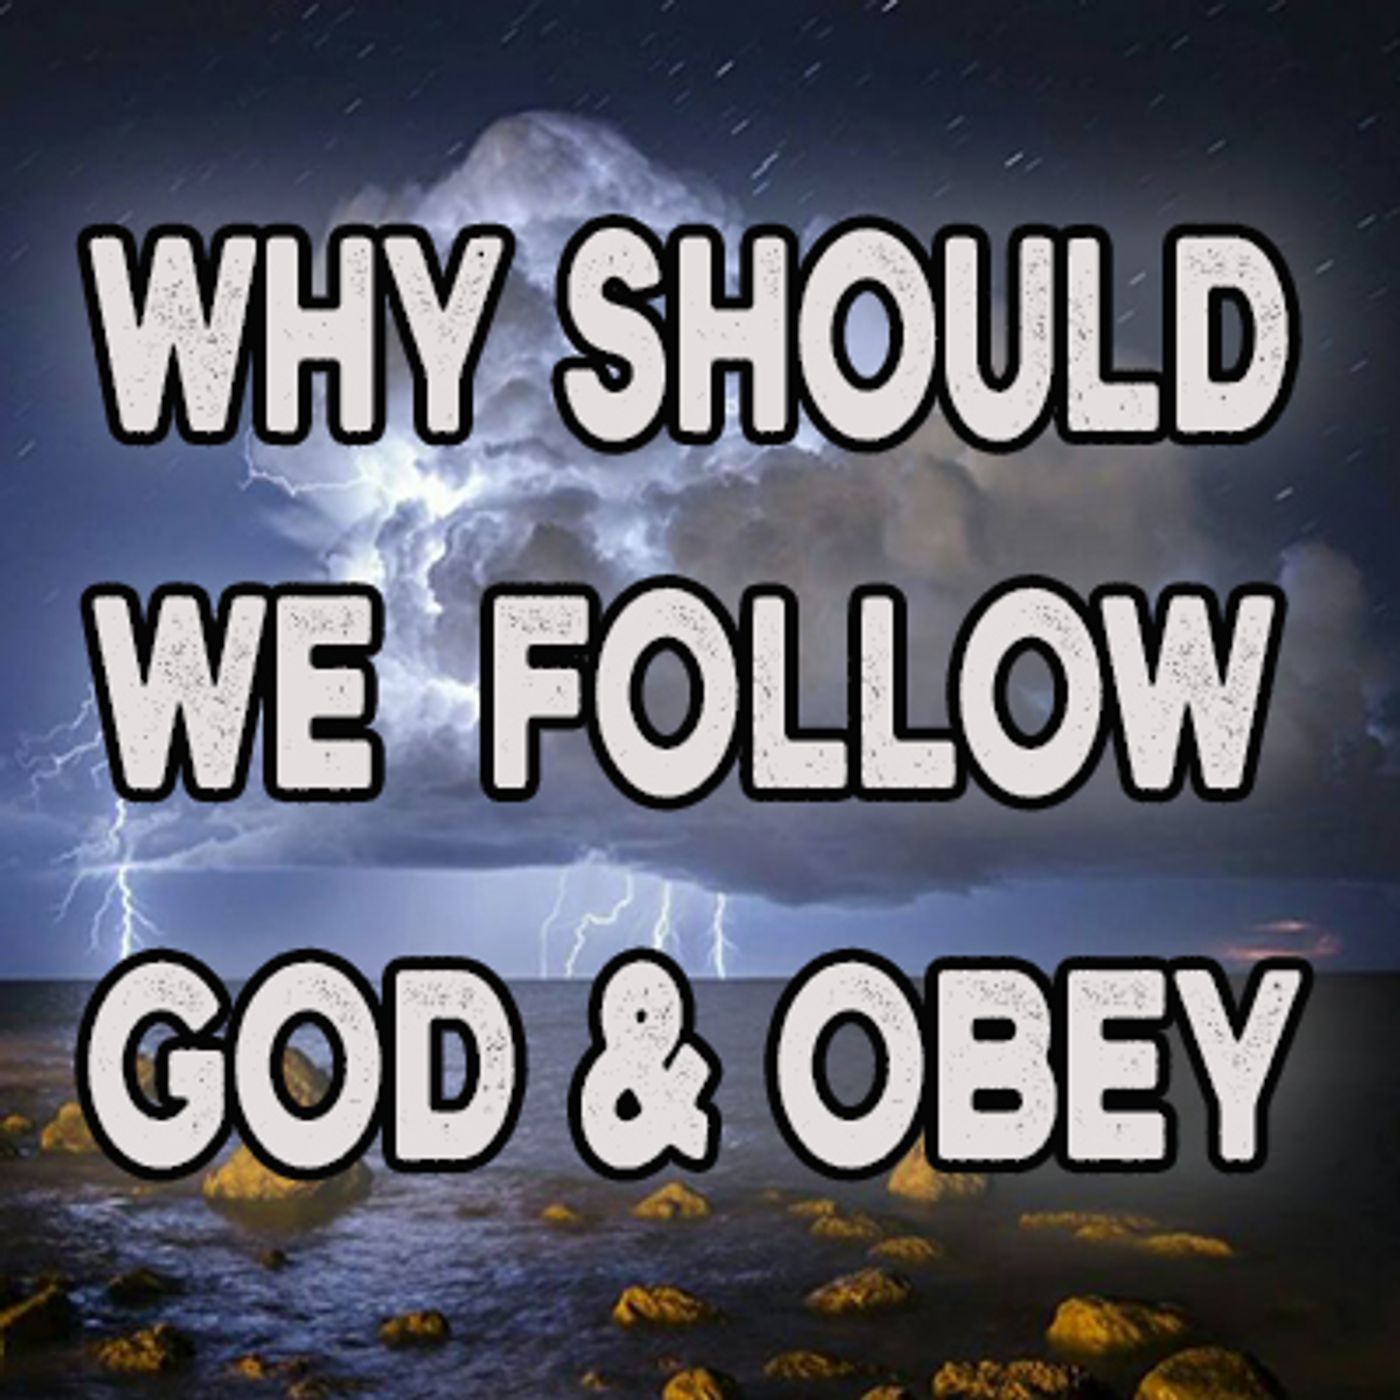 Why Should We Follow God & Obey (Part 4)